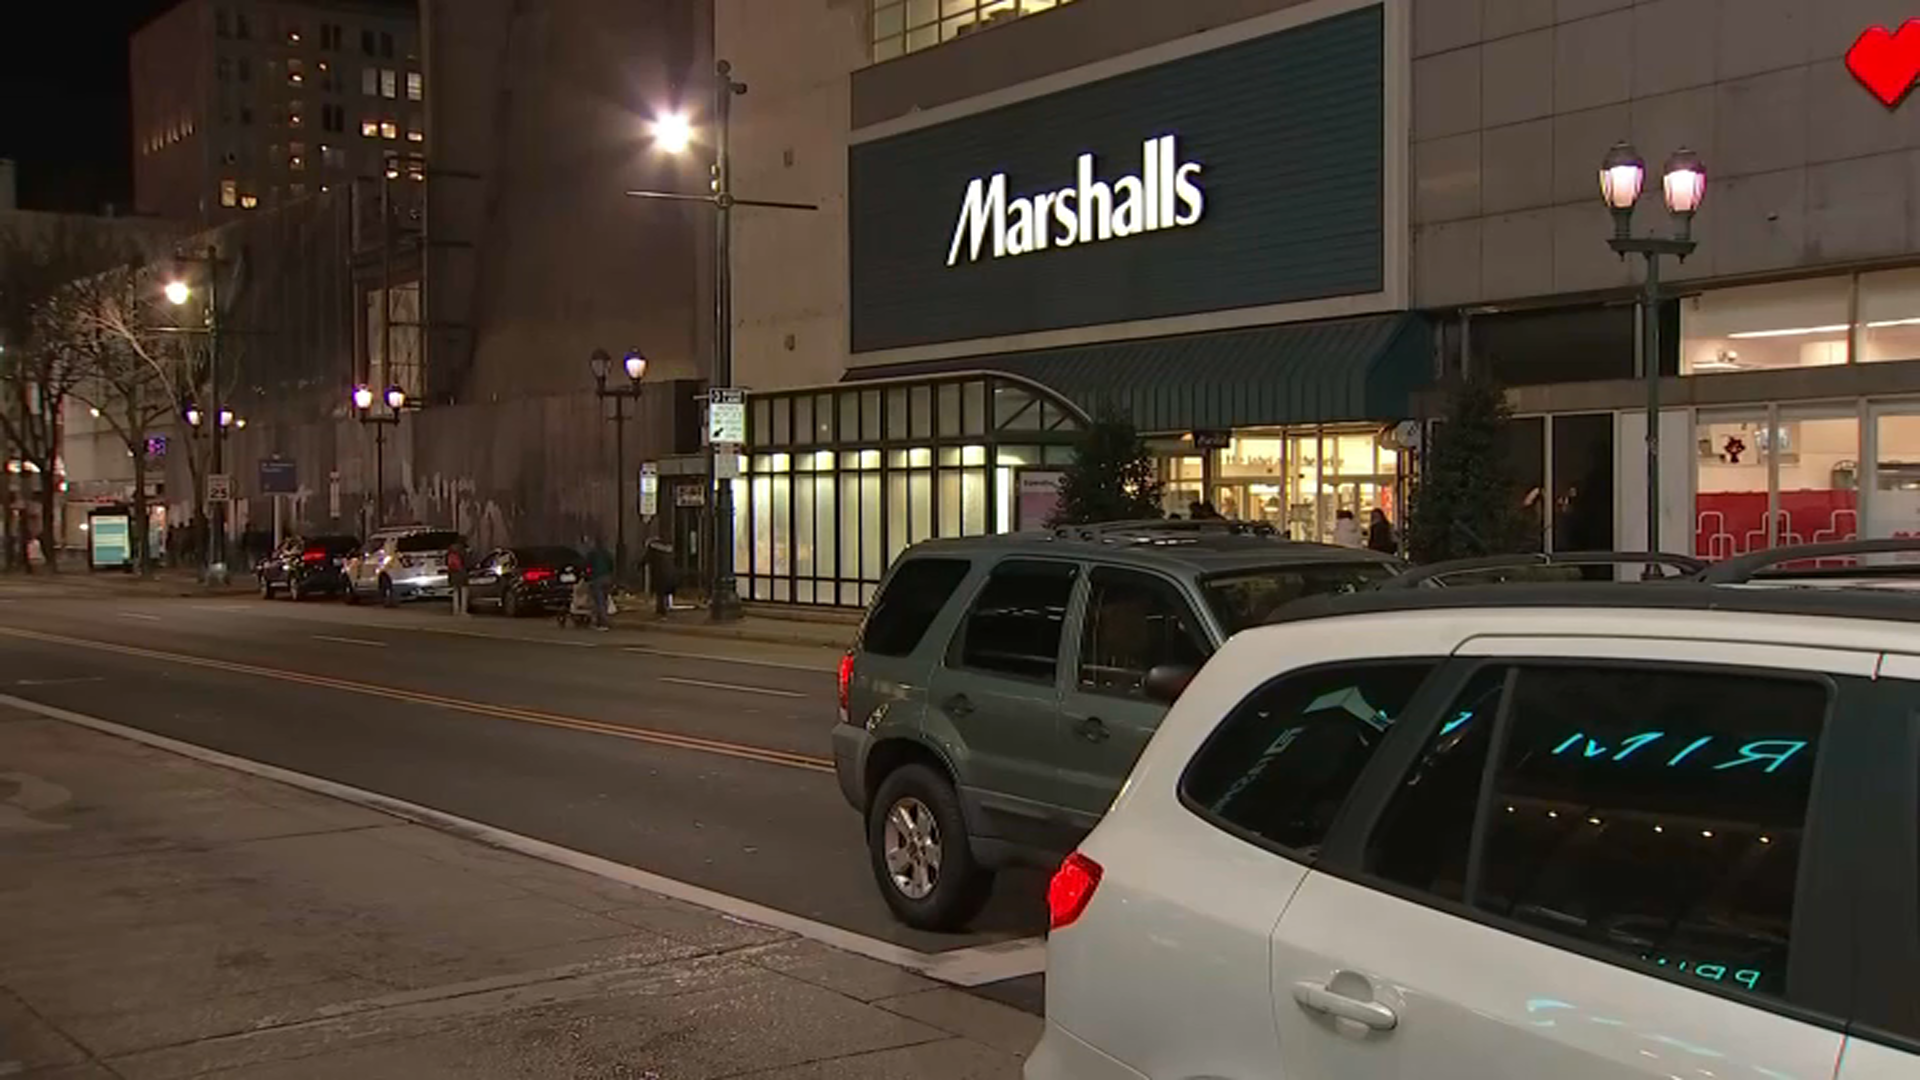 TJ Maxx and Marshalls closing locations in the same city as store